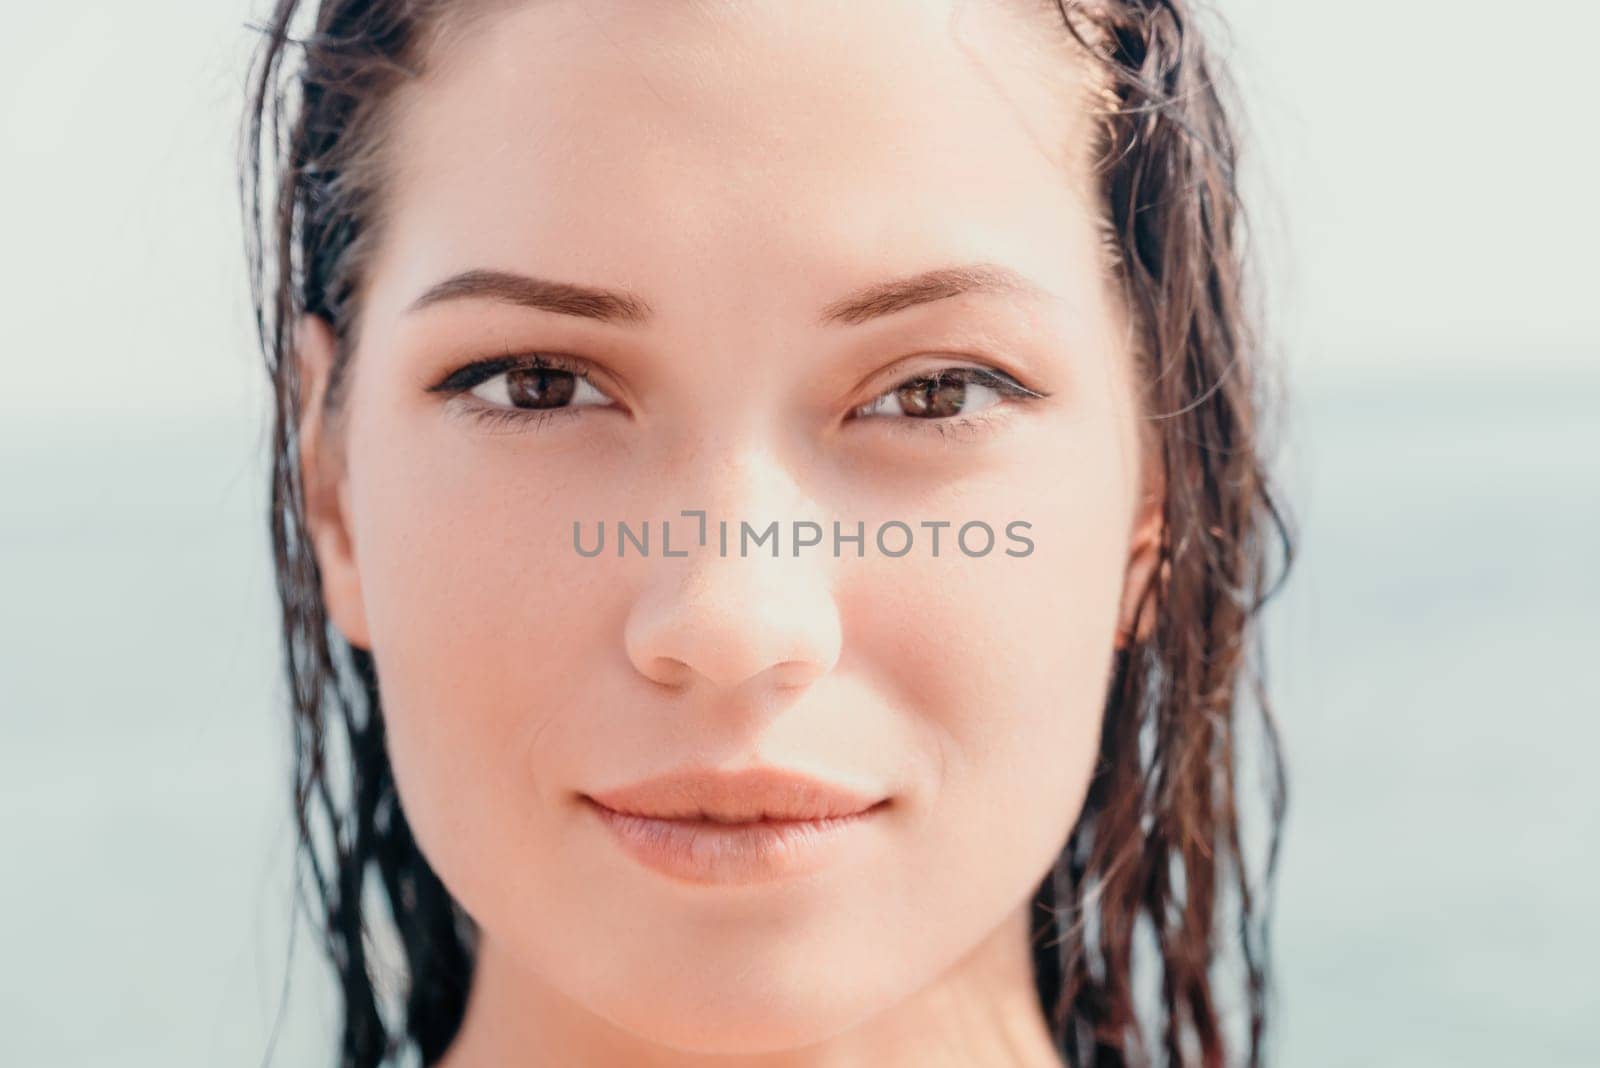 Woman sea sup. Close up portrait of beautiful young caucasian woman with black hair and freckles looking at camera and smiling. Cute woman portrait in a pink bikini posing on sup board in the sea. by panophotograph